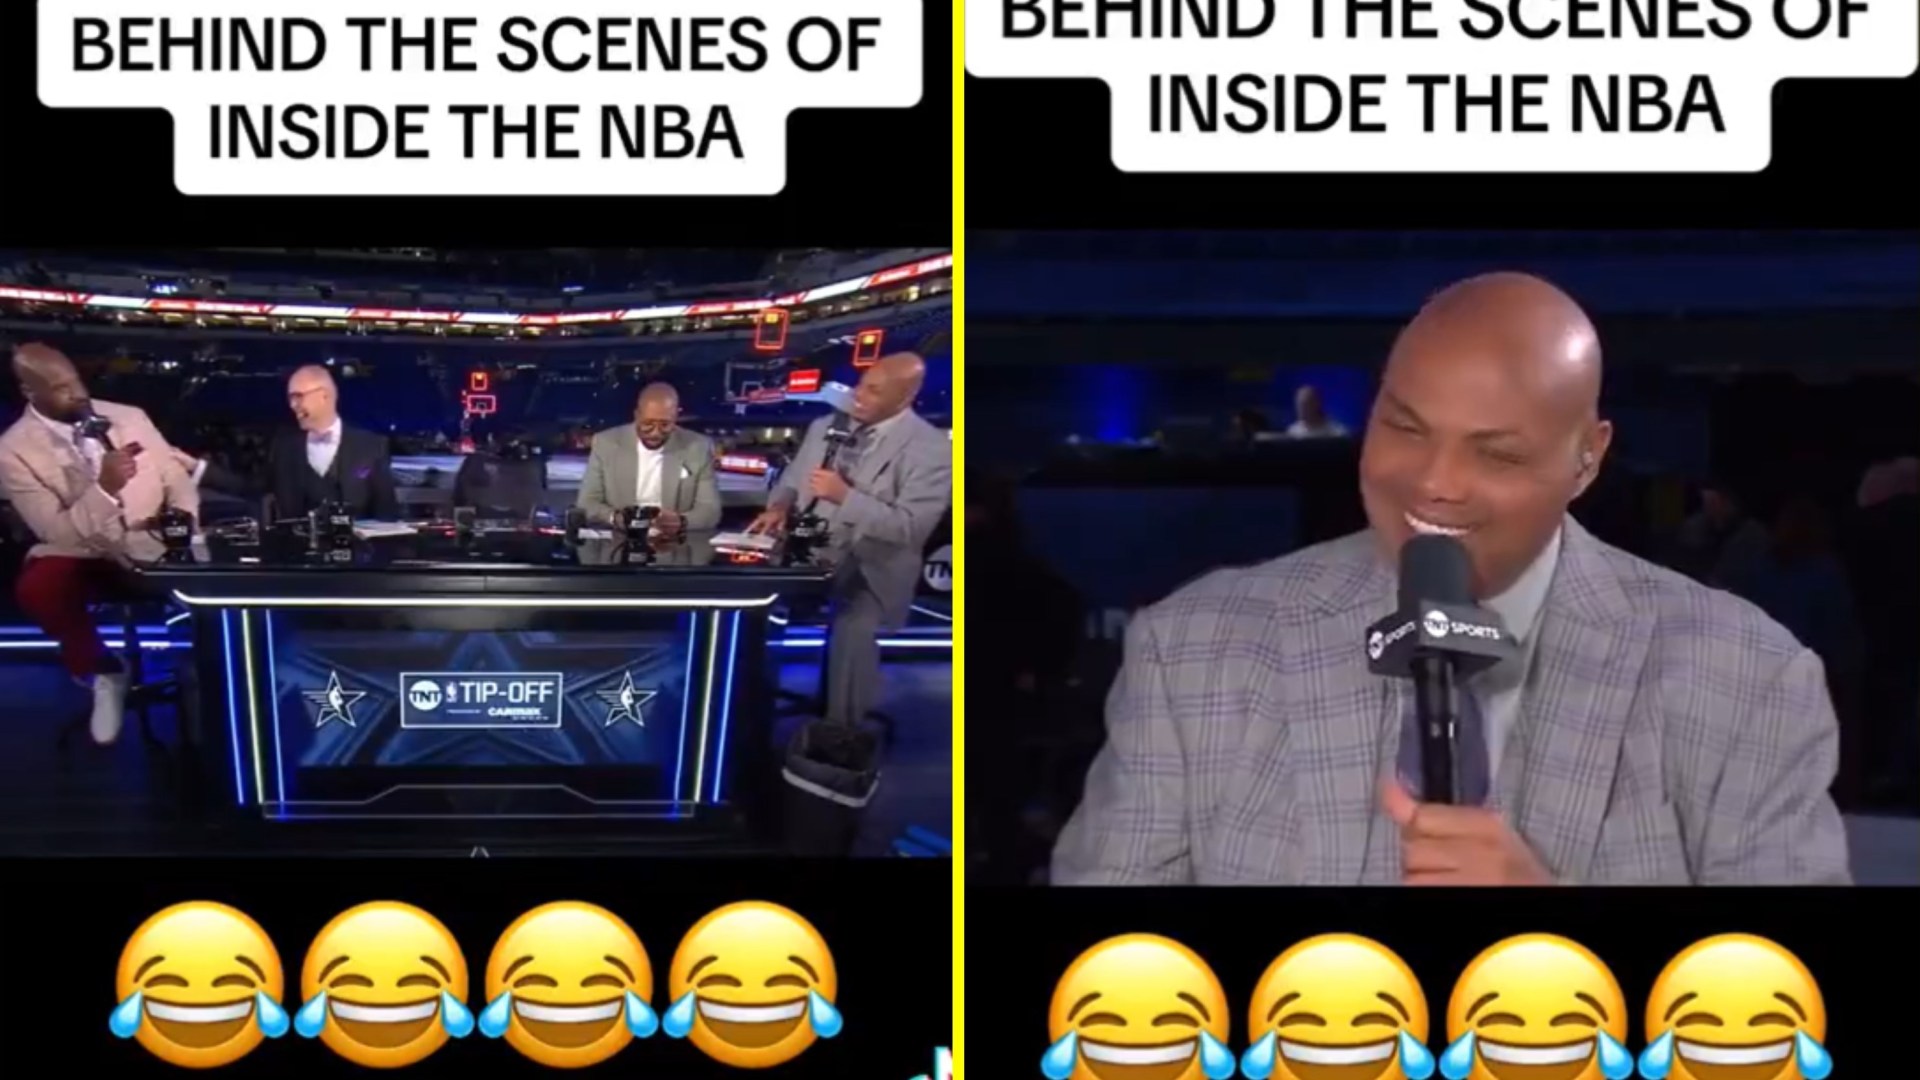 Leaked behind-the-scenes TNT footage reveals Shaq and Charles Barkley's hilarious x-rated exchange